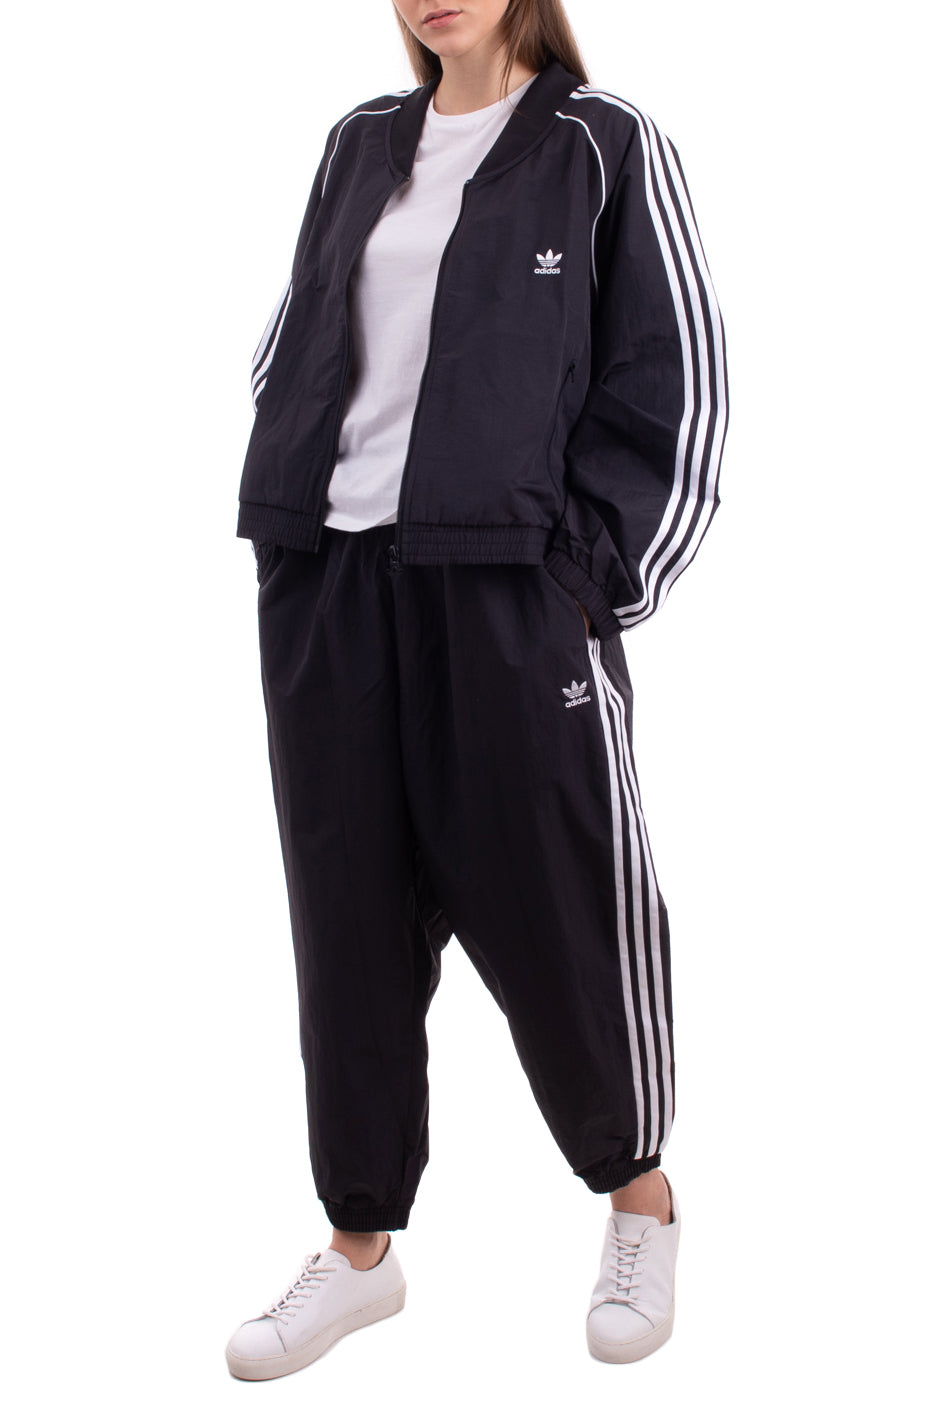 ADIDAS ORIGINALS PRIMEGREEN Track Trousers Plus Size 3X Mesh Lined Double Waist gallery main photo